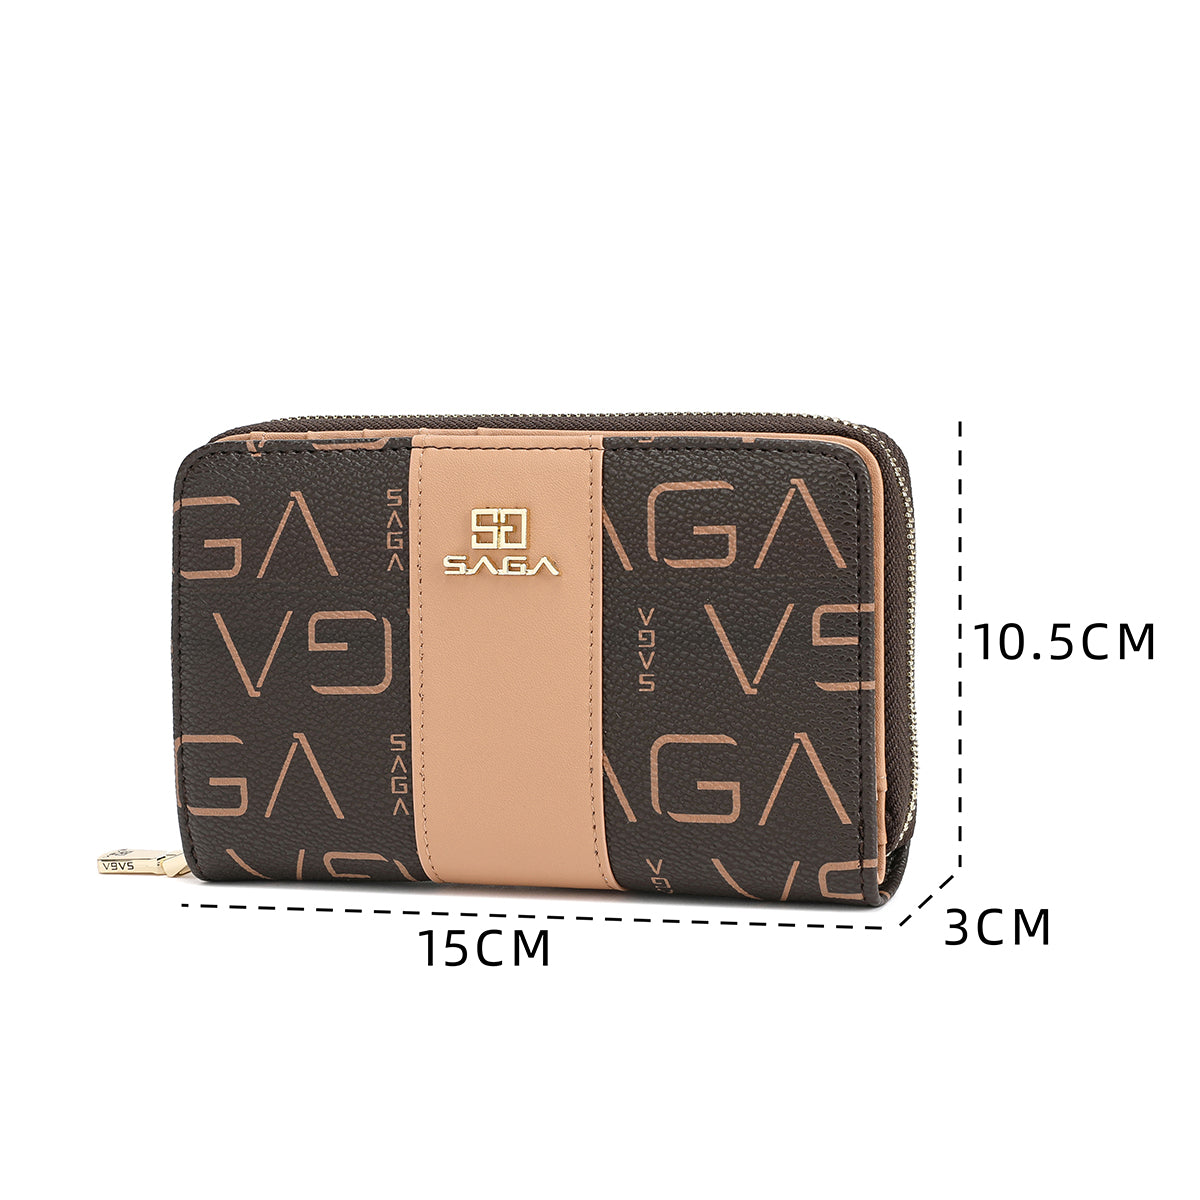 Elegant women's wallet with a modern design made of microfiber, coffee color